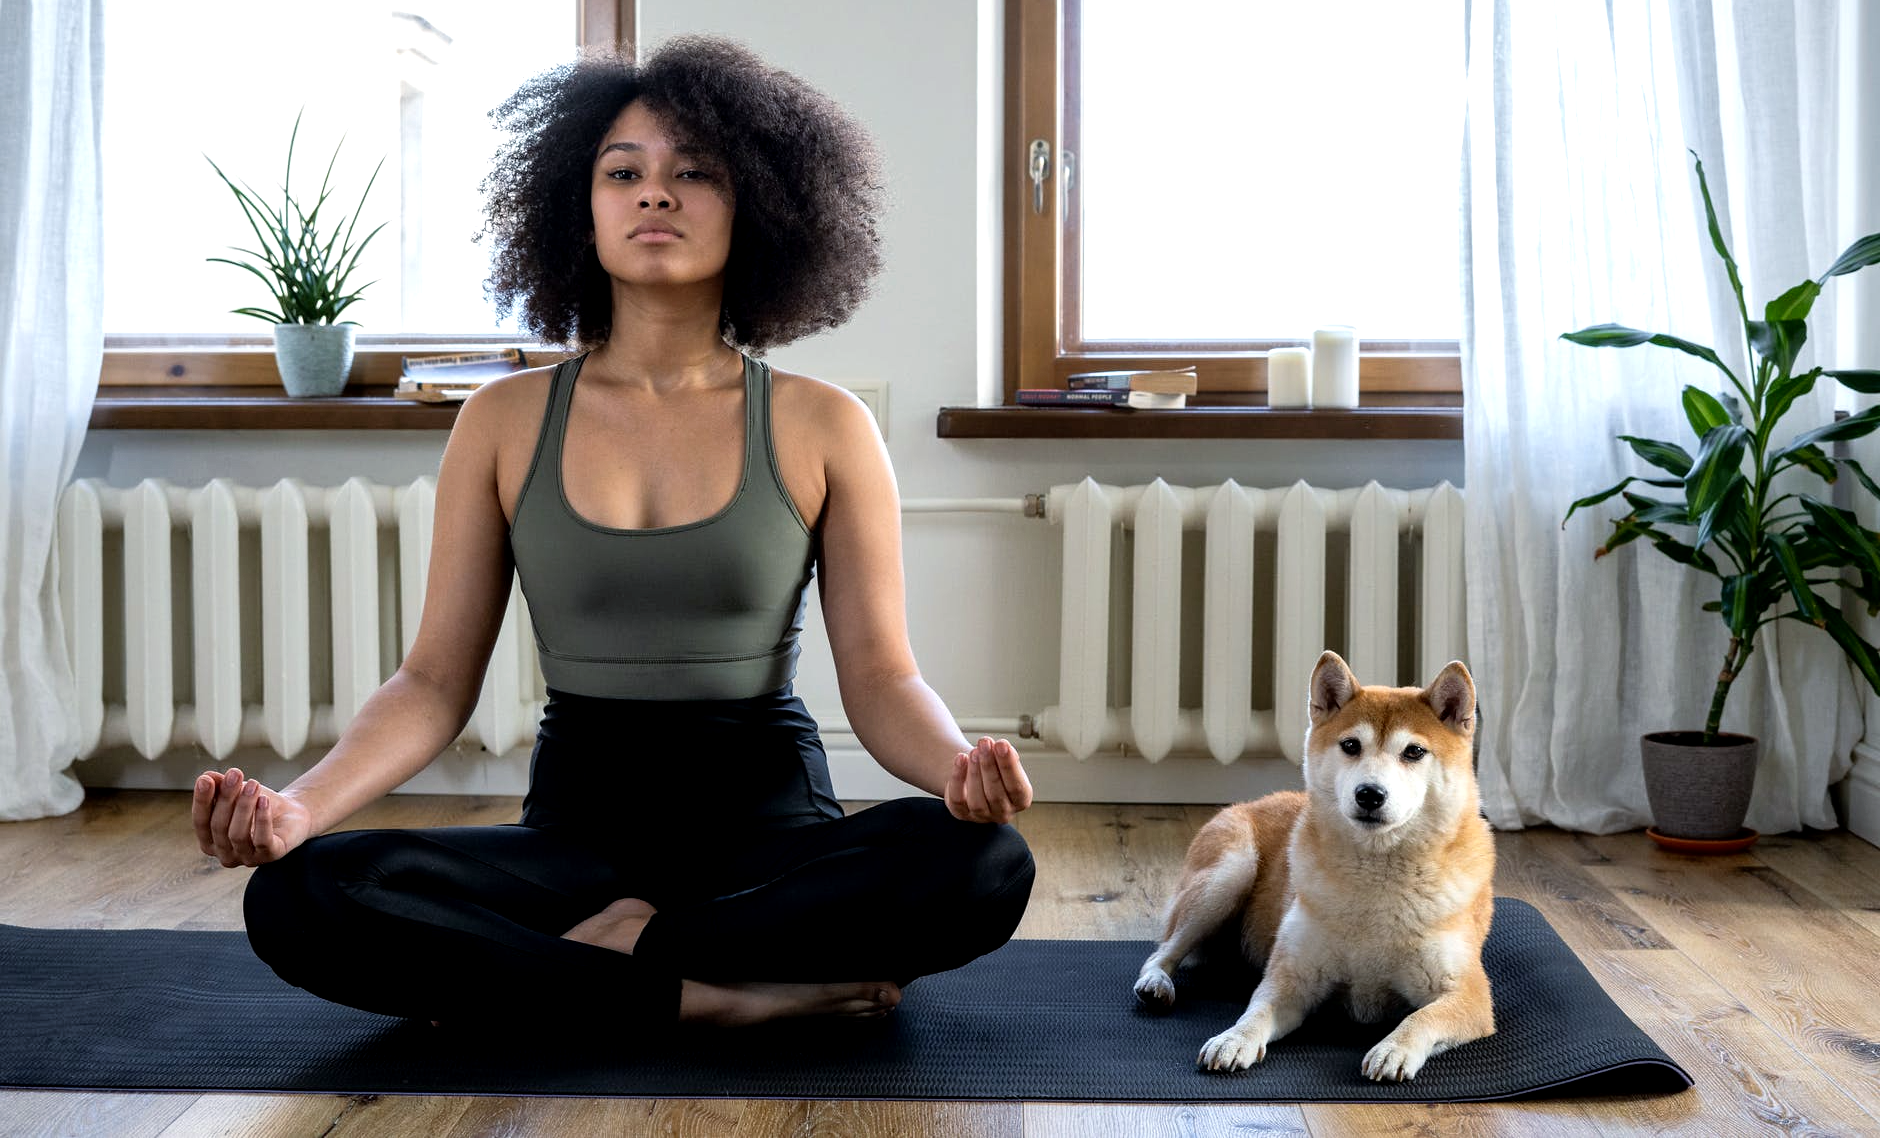 Dog with owner on yoga mat - separation anxiety